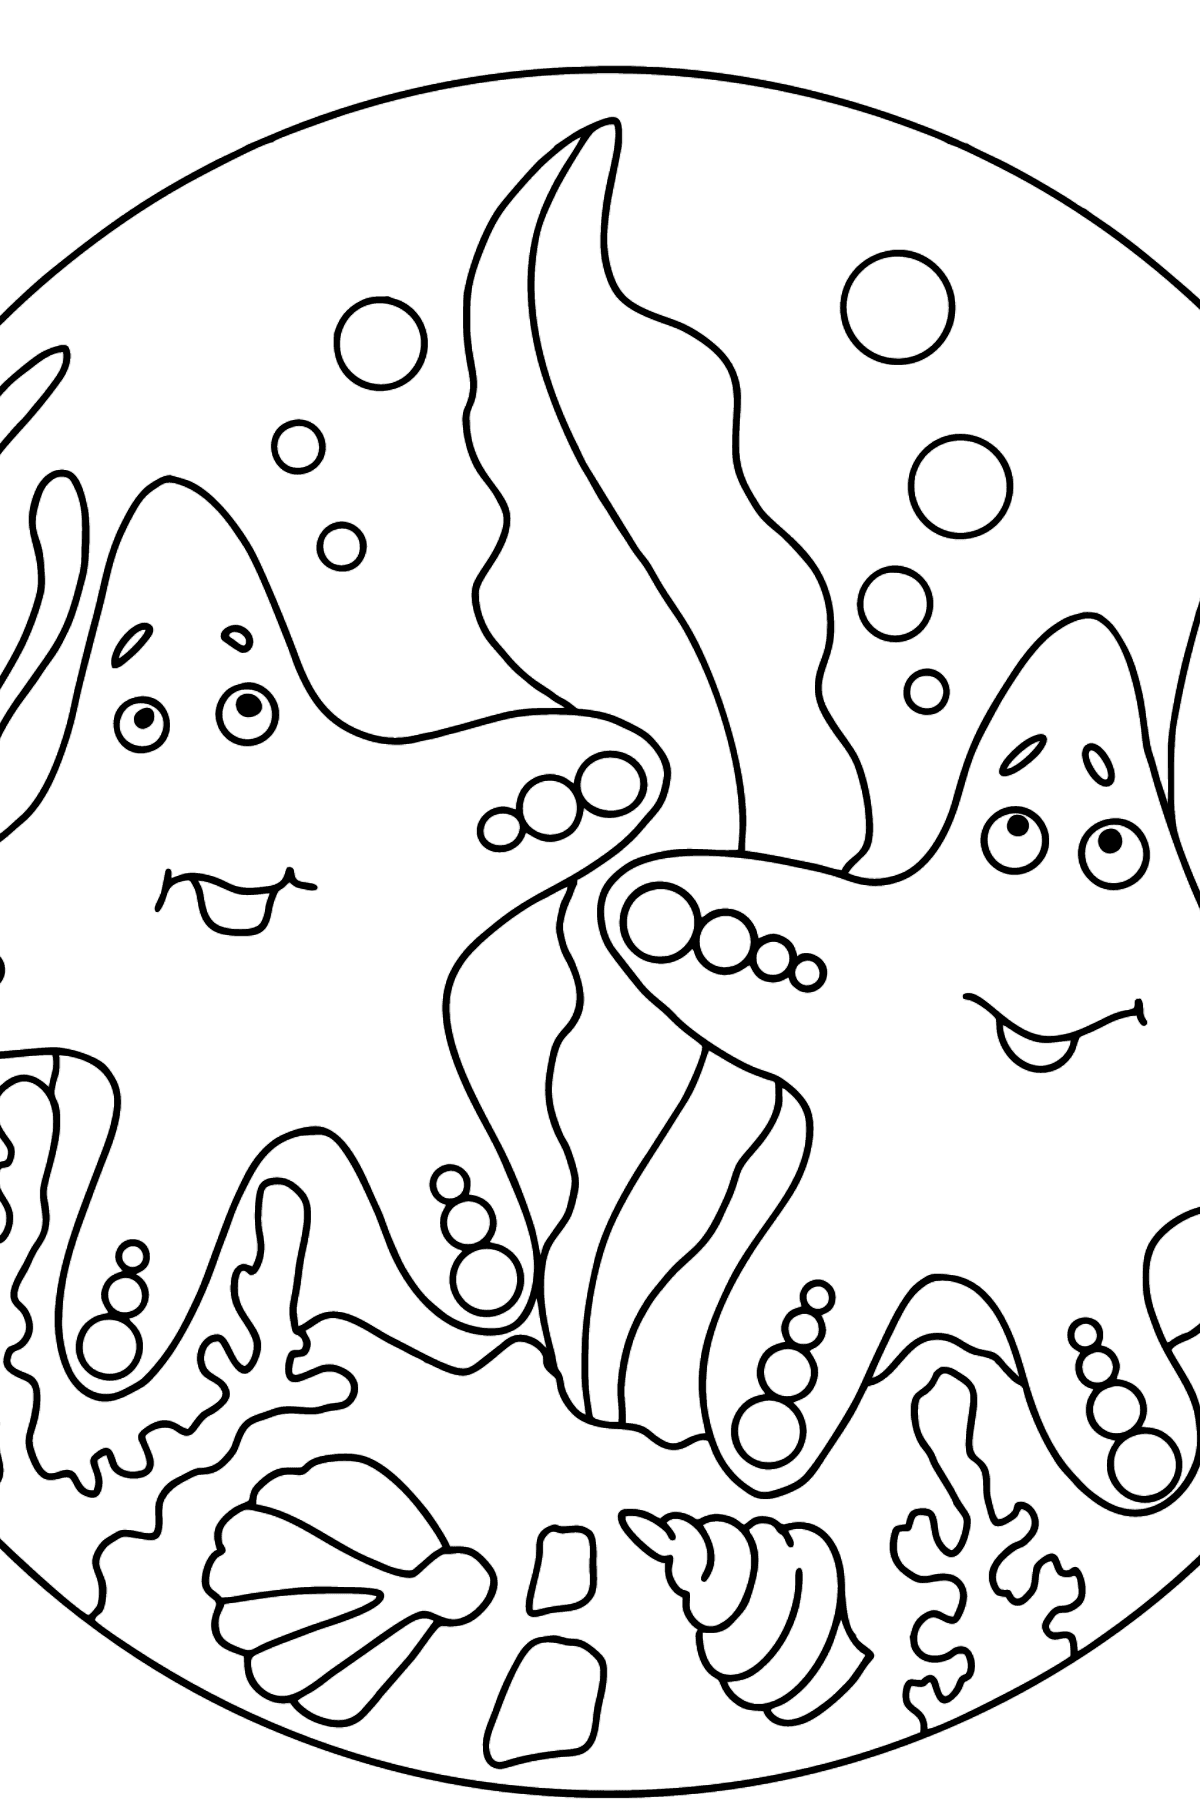 Two Charming Starfish Coloring Page - Coloring Pages for Kids